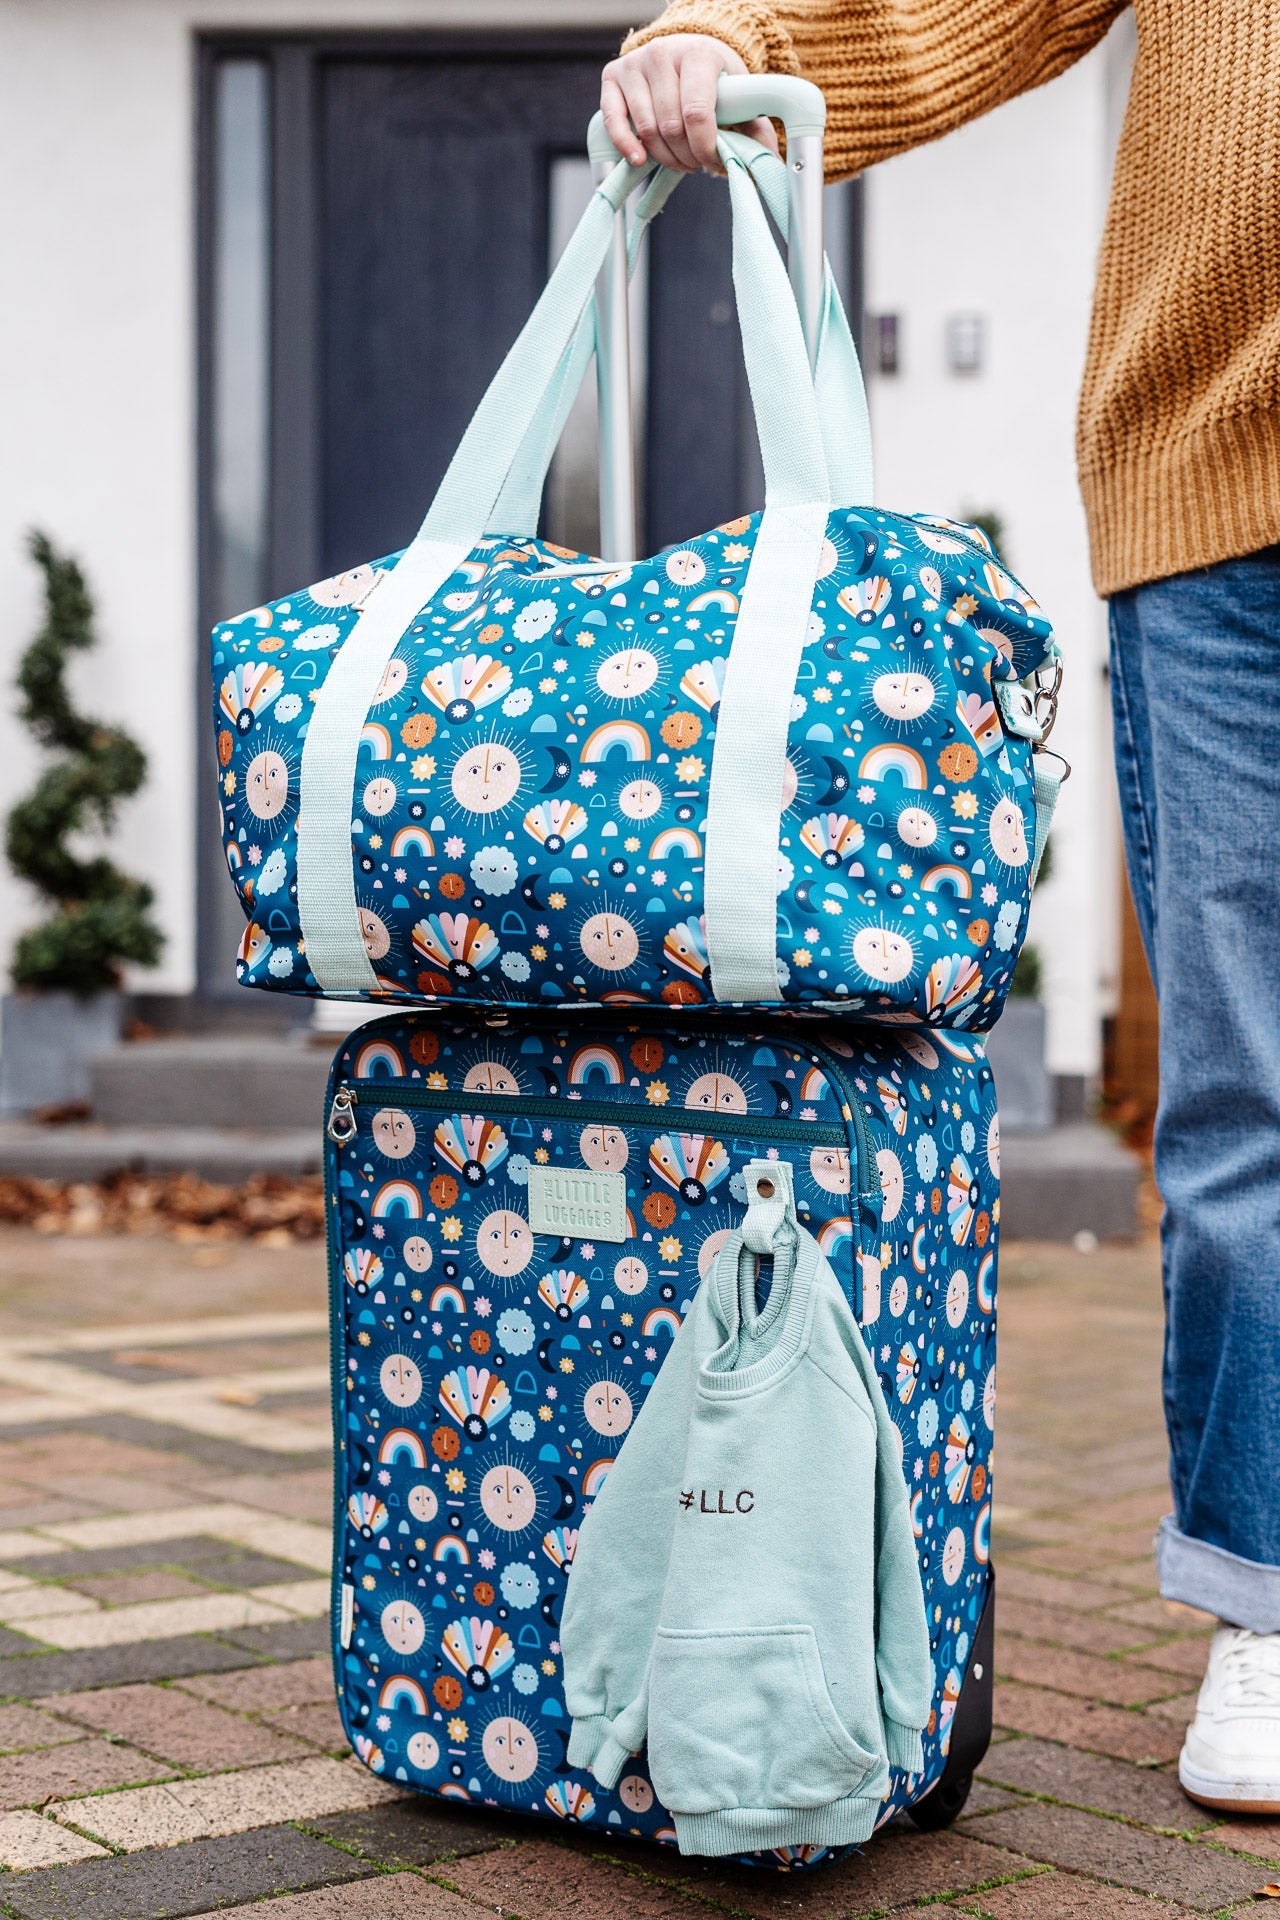 image of a cute patterned tote bag on a suitcase